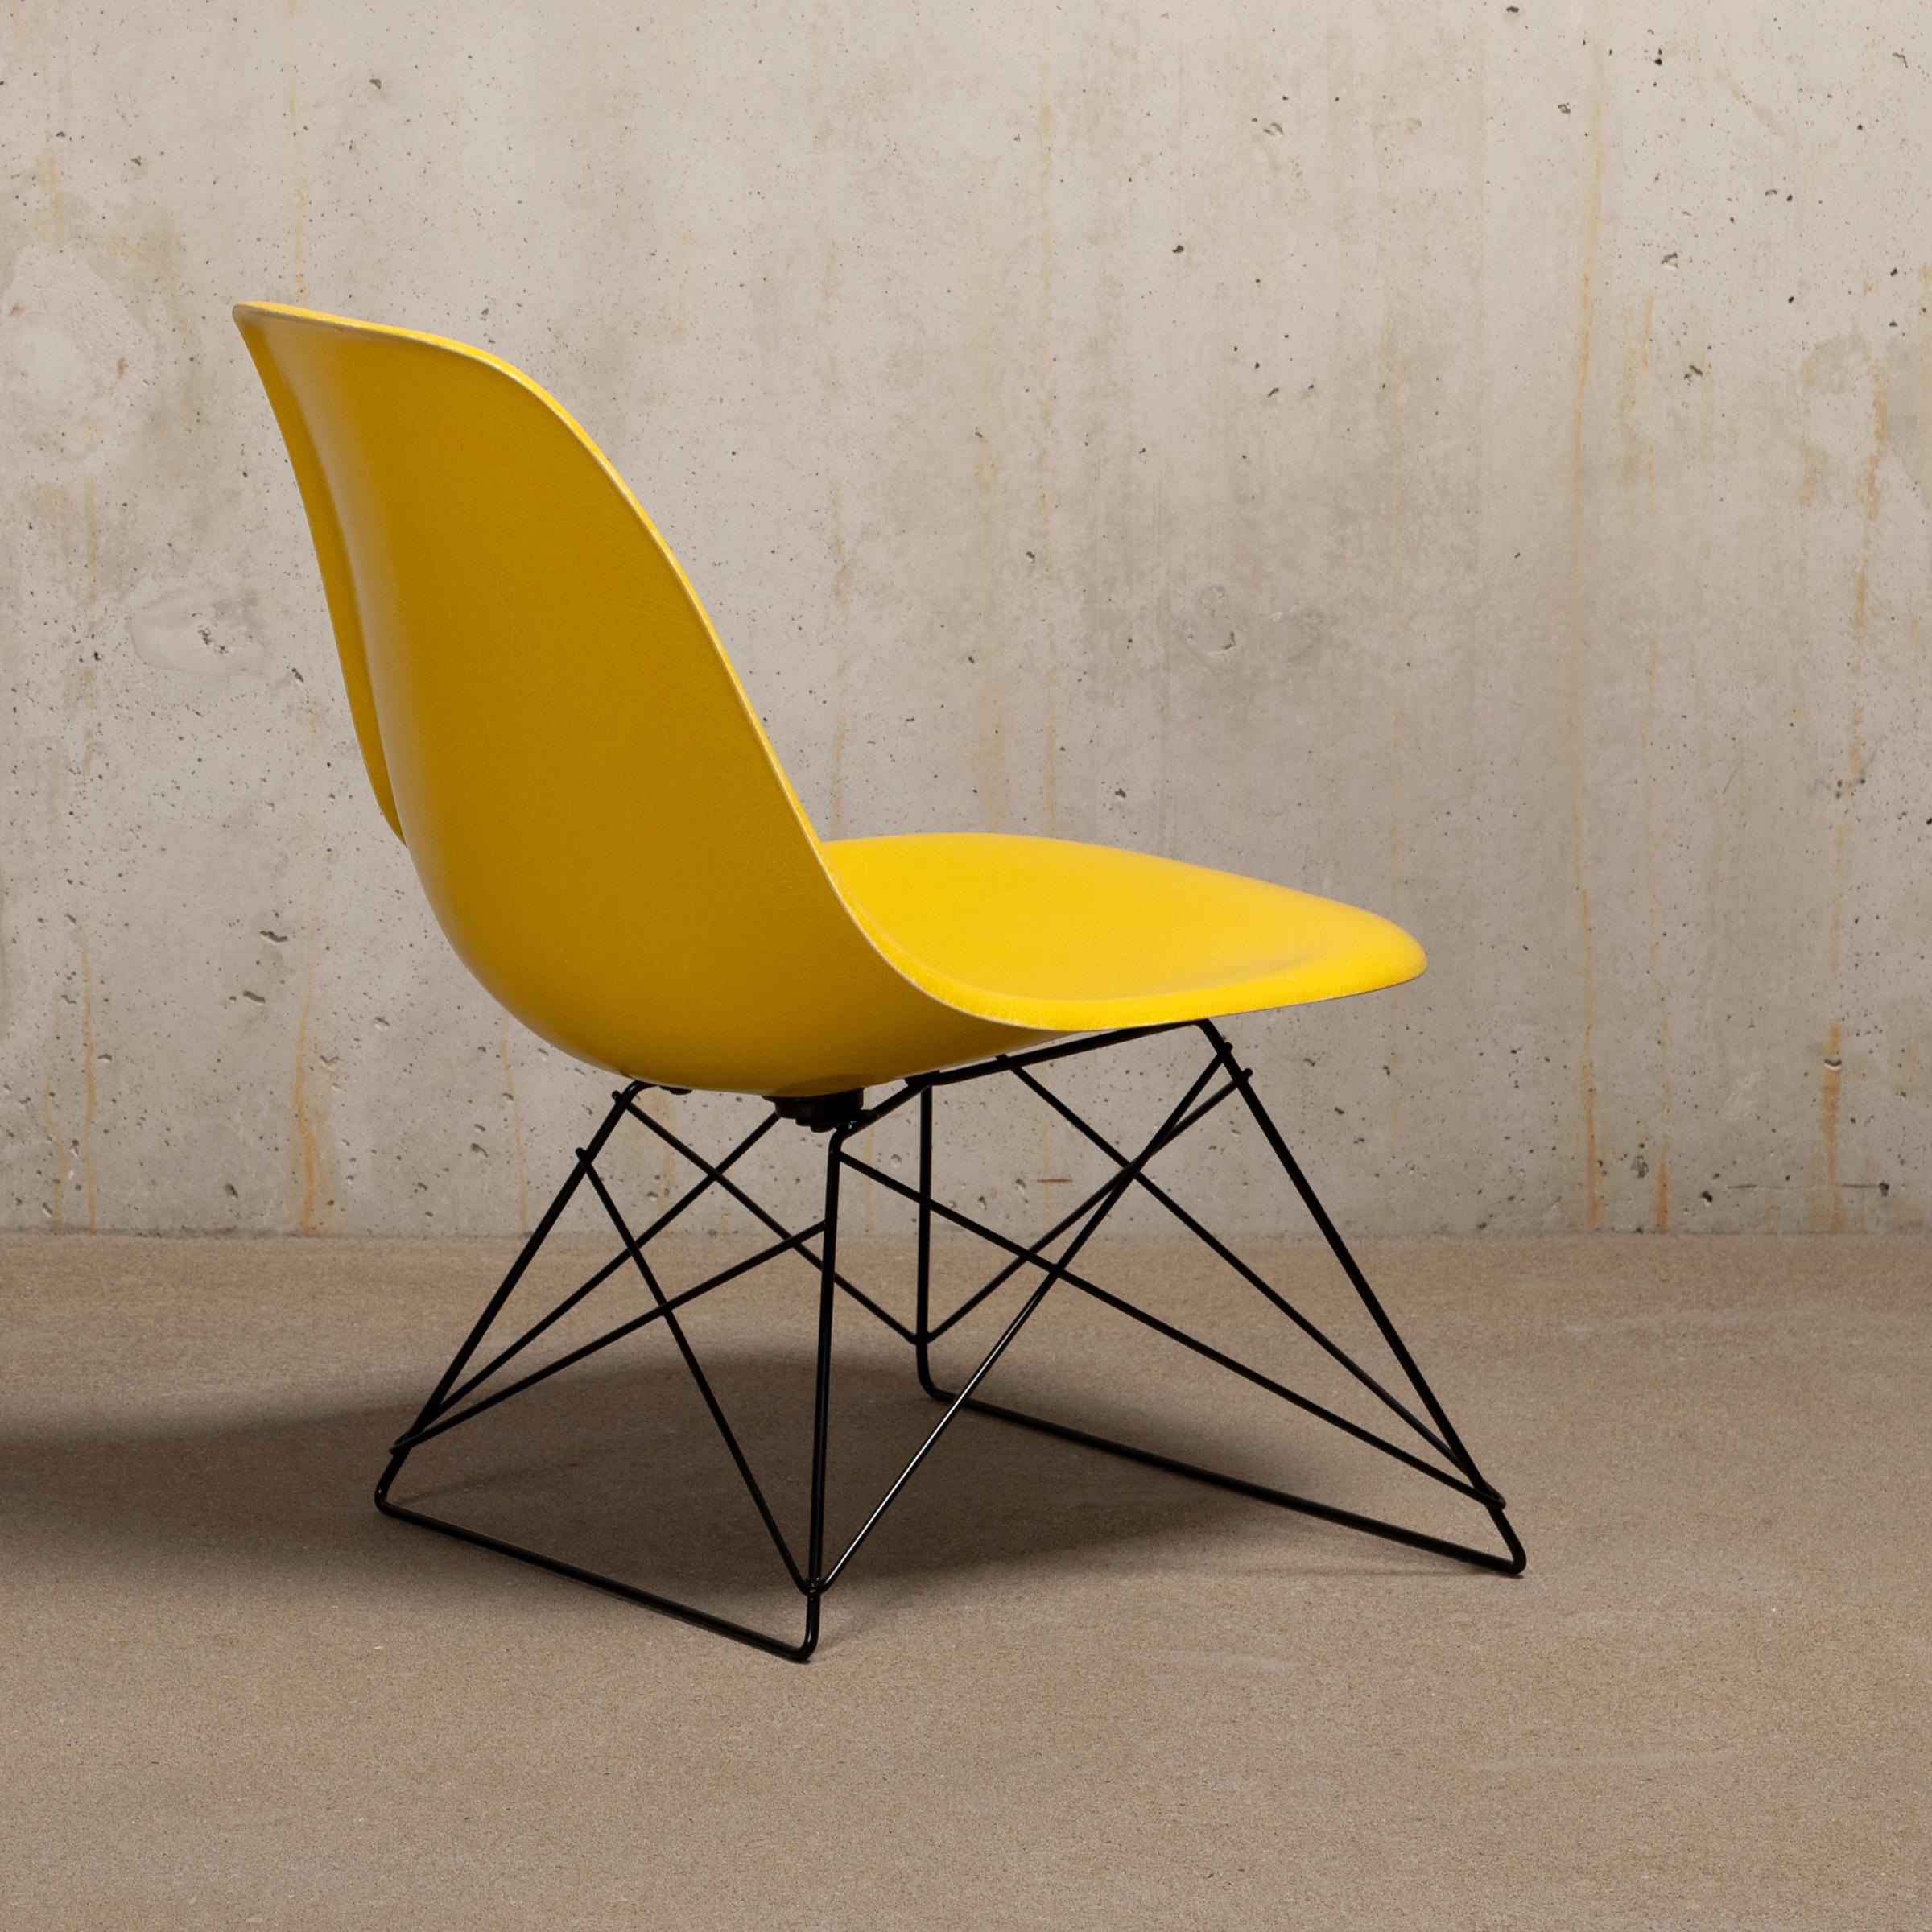 Mid-Century Modern Charles & Ray Eames LSR Lounge Chair in Bright Yellow for Herman Miller